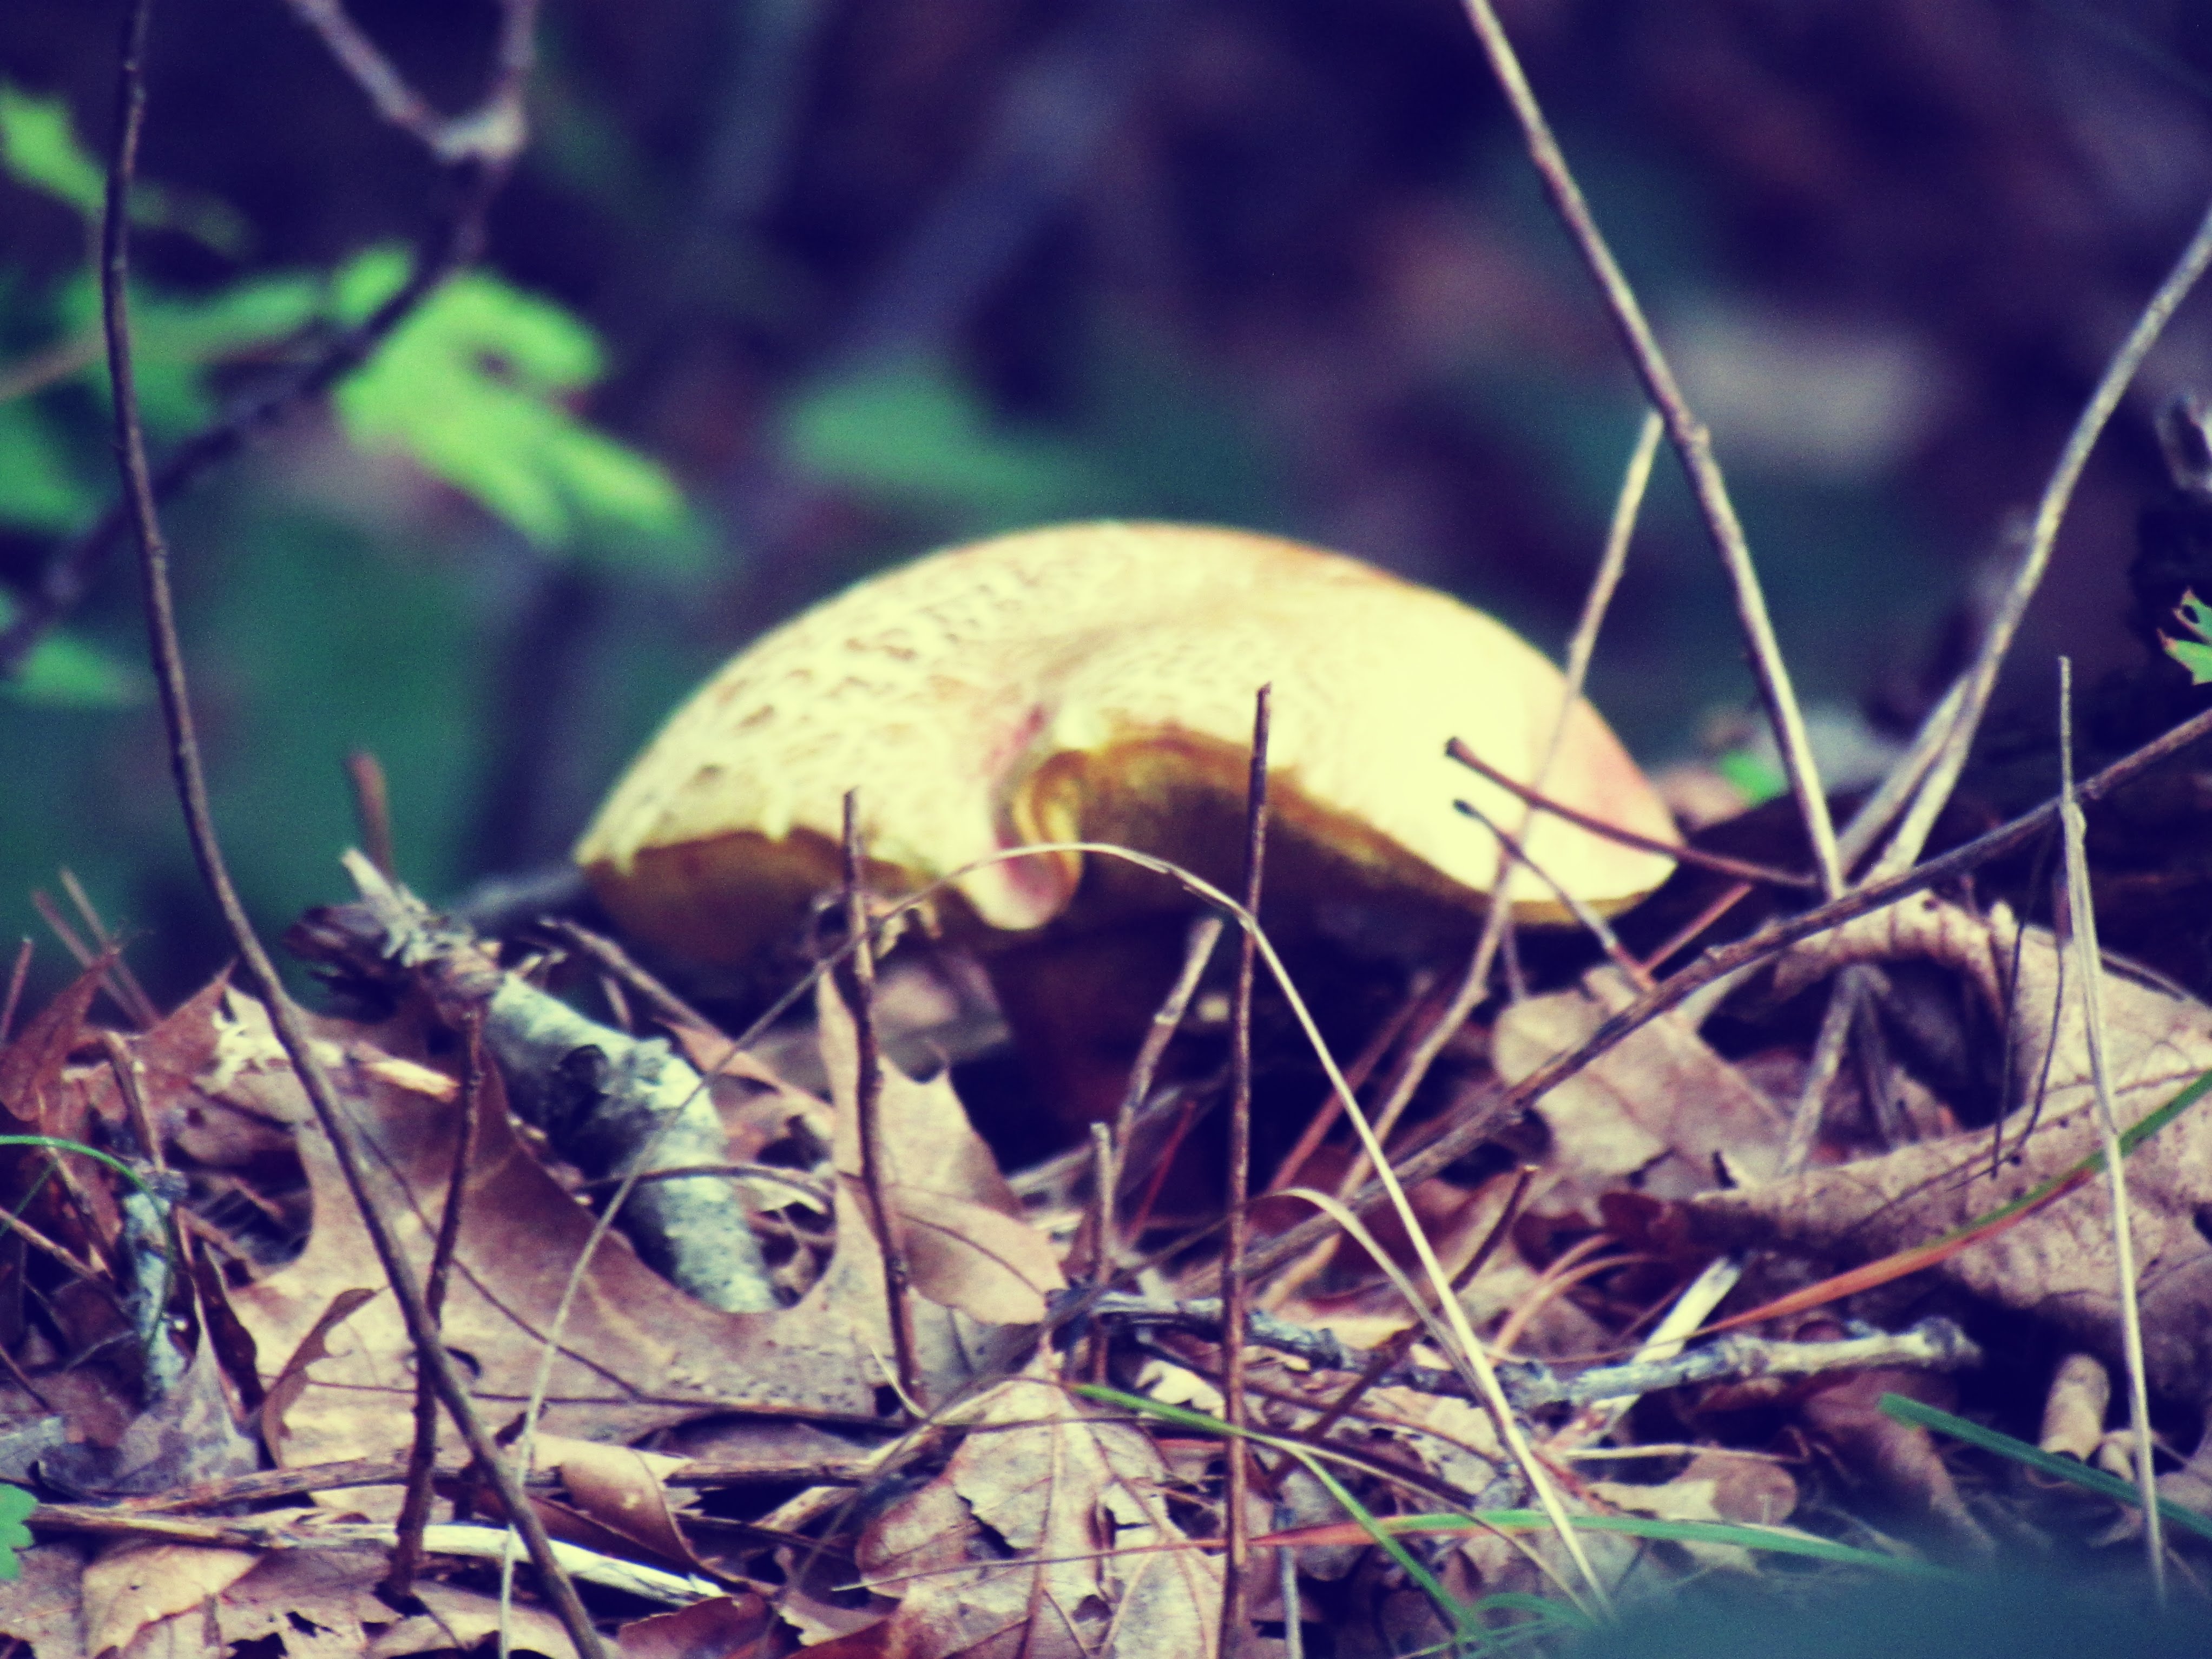 A mushroom in a woodland pine area in the forests of Rhode Island in the summer months